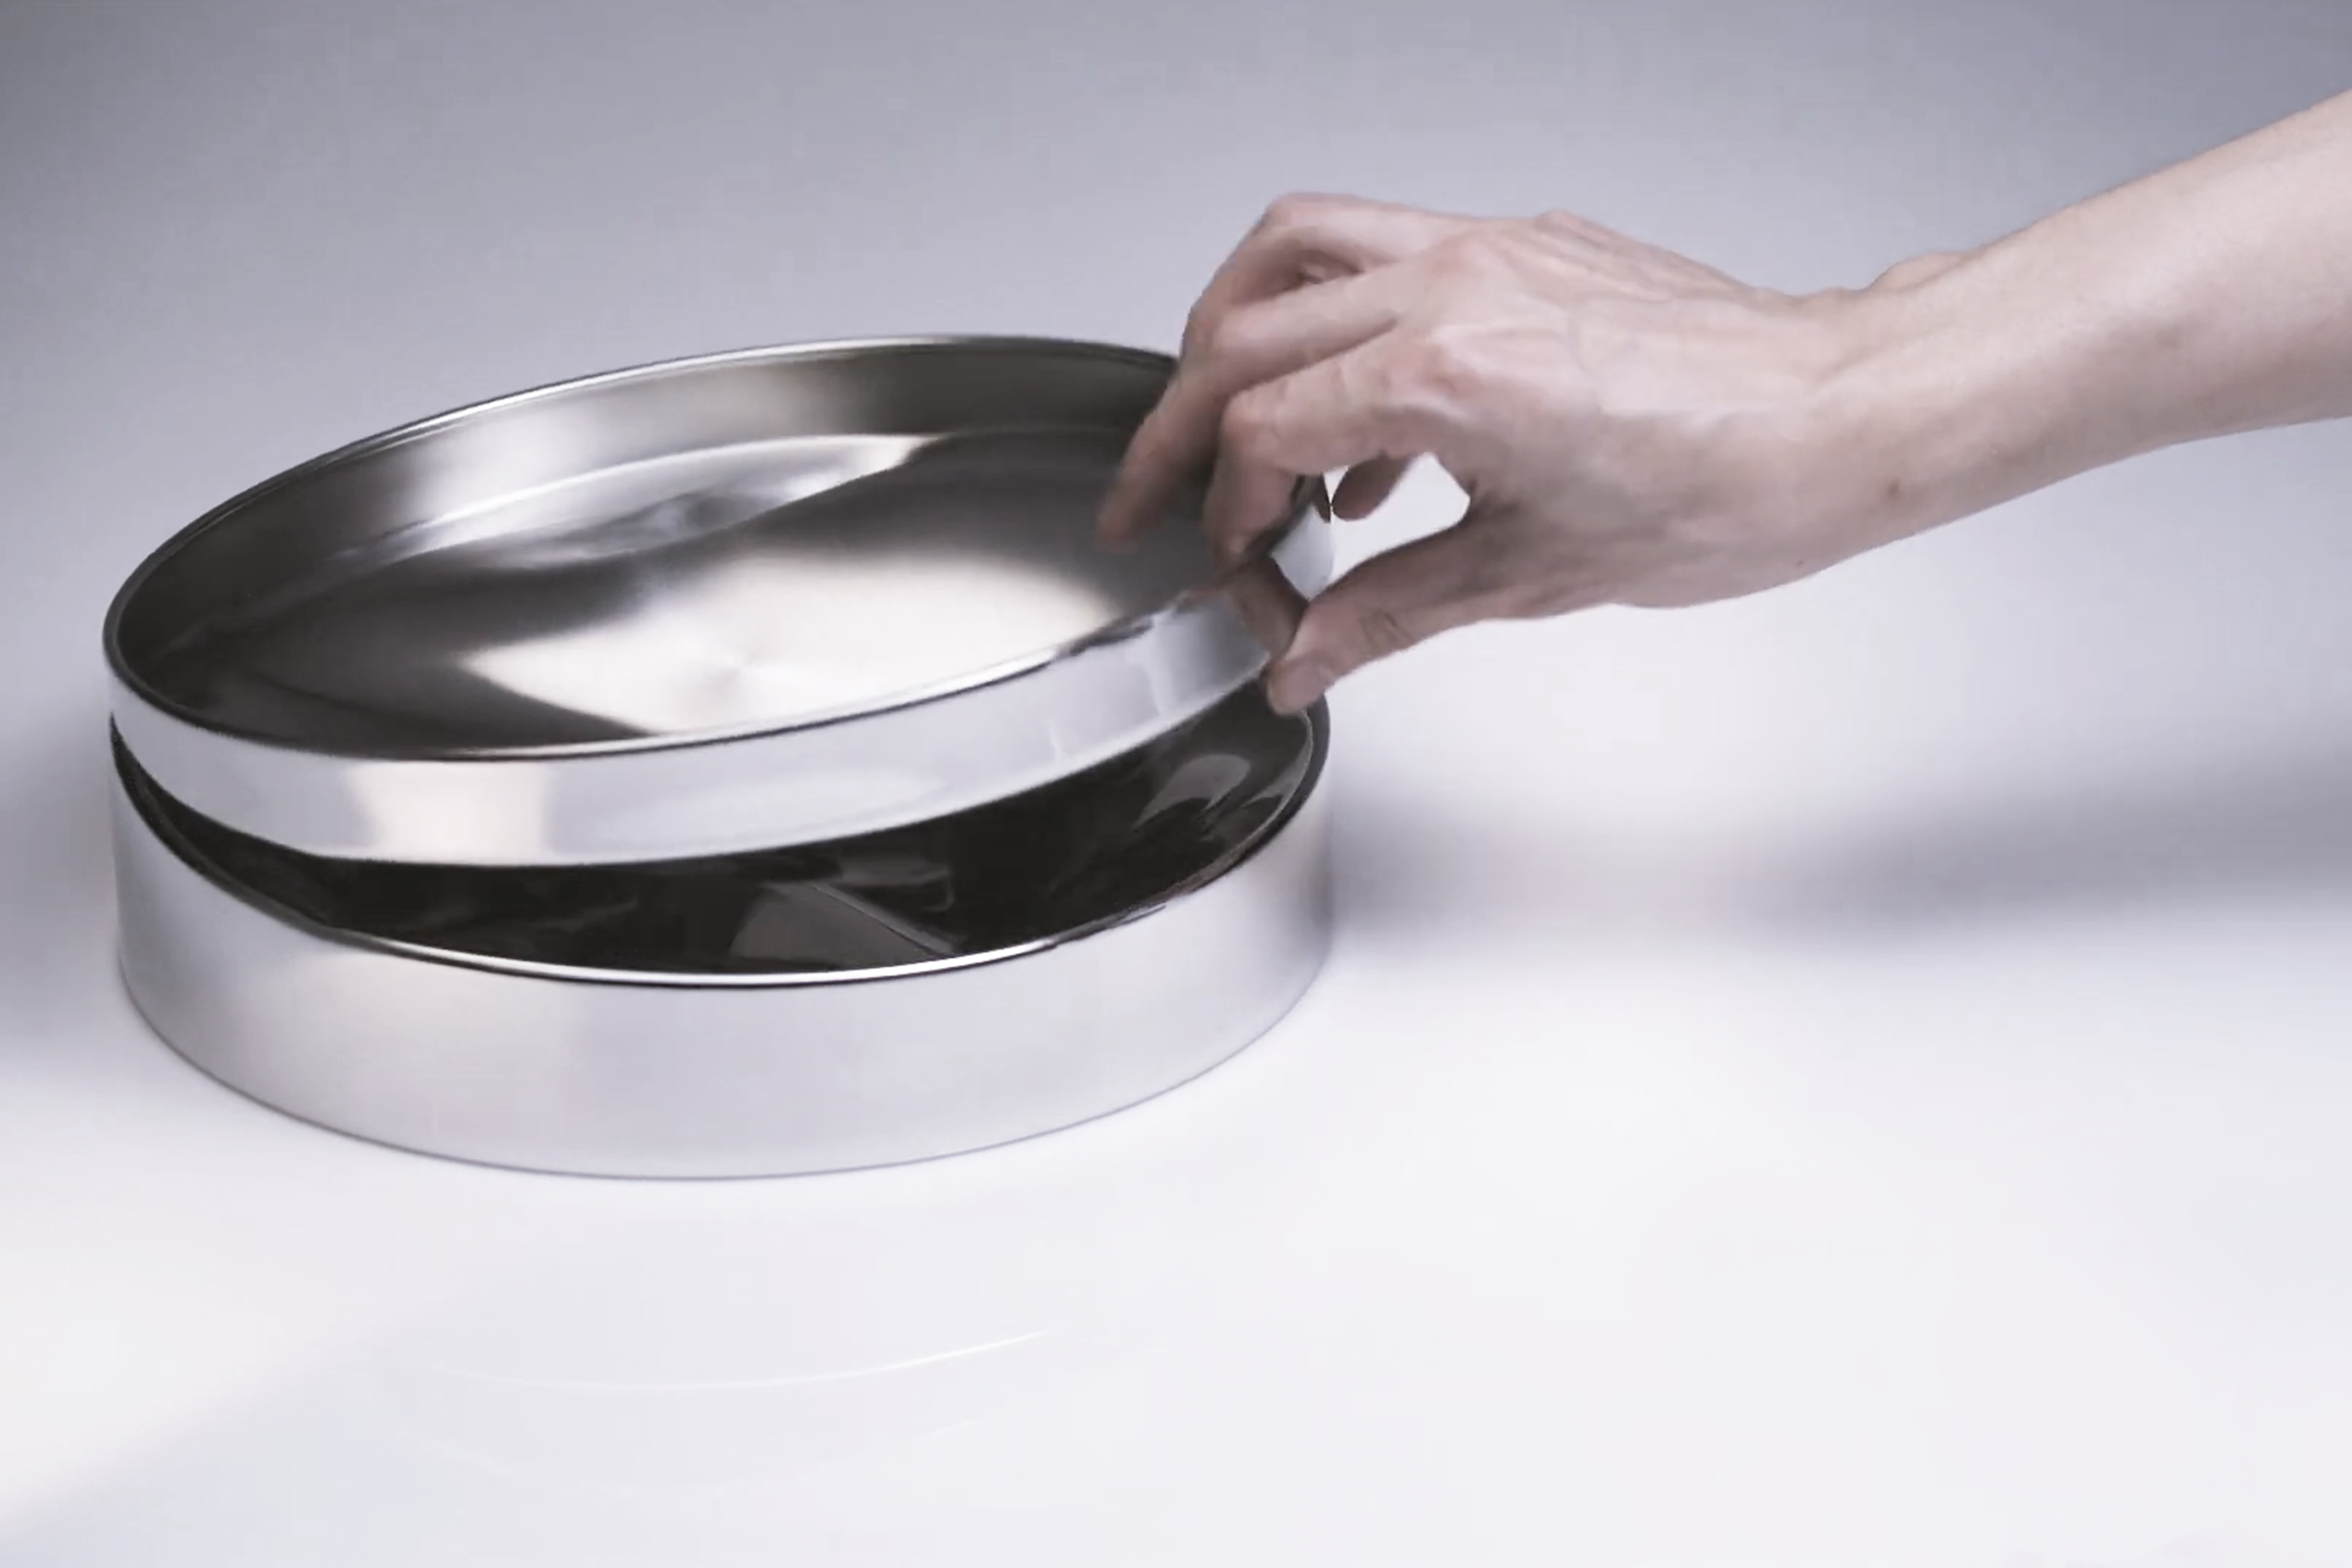 COEXISTENCE - Stainless Steel Tray Set